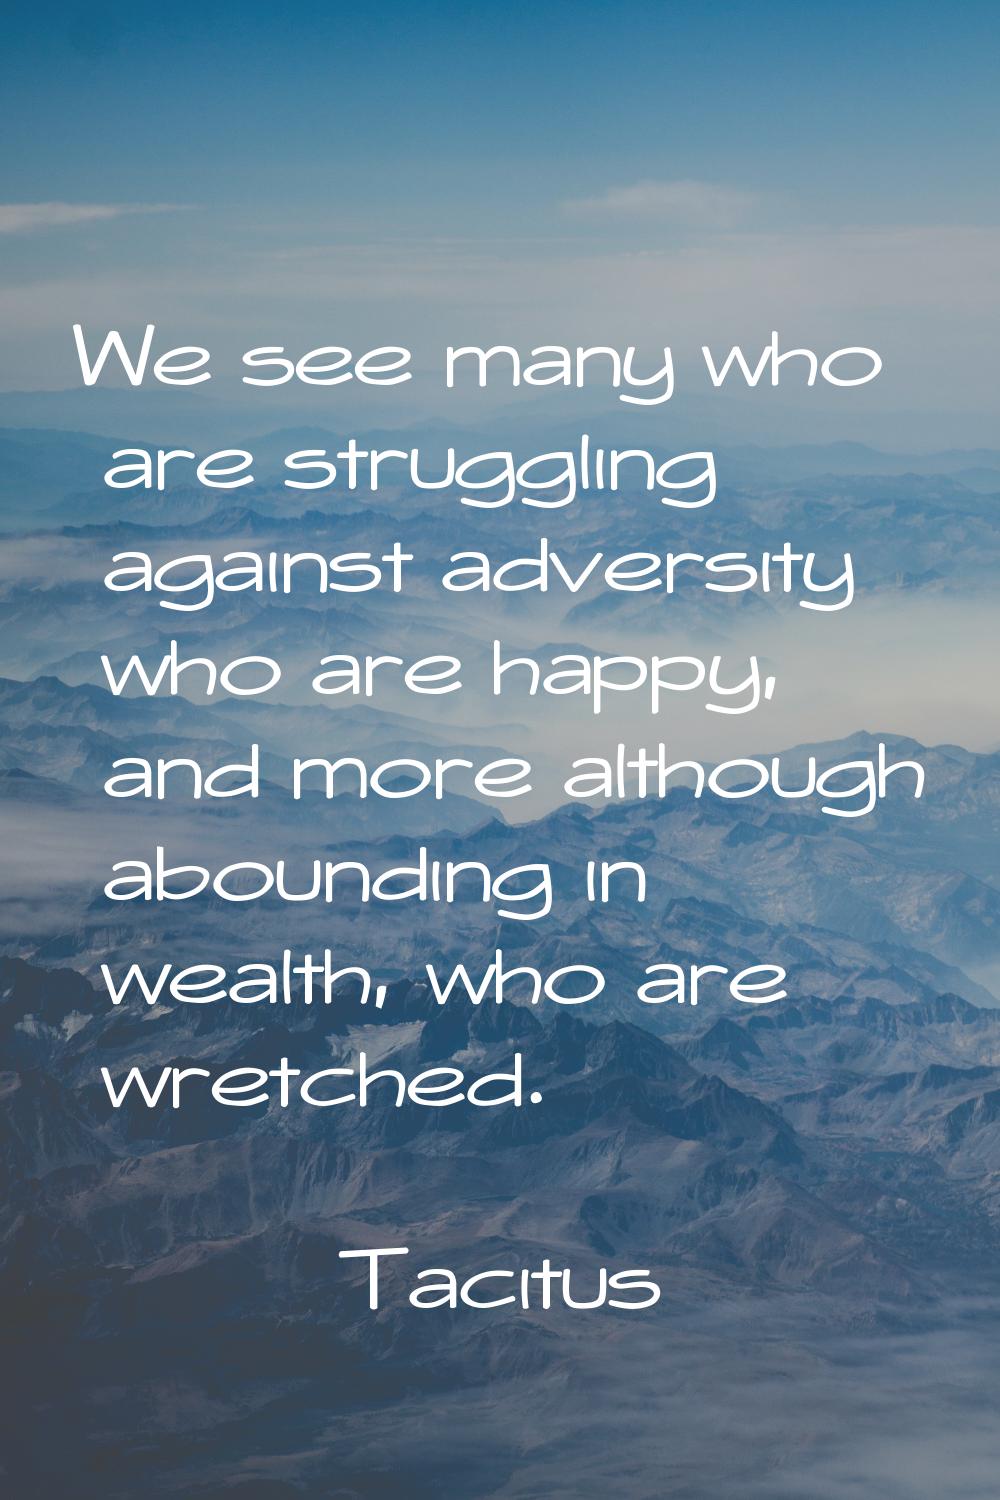 We see many who are struggling against adversity who are happy, and more although abounding in weal